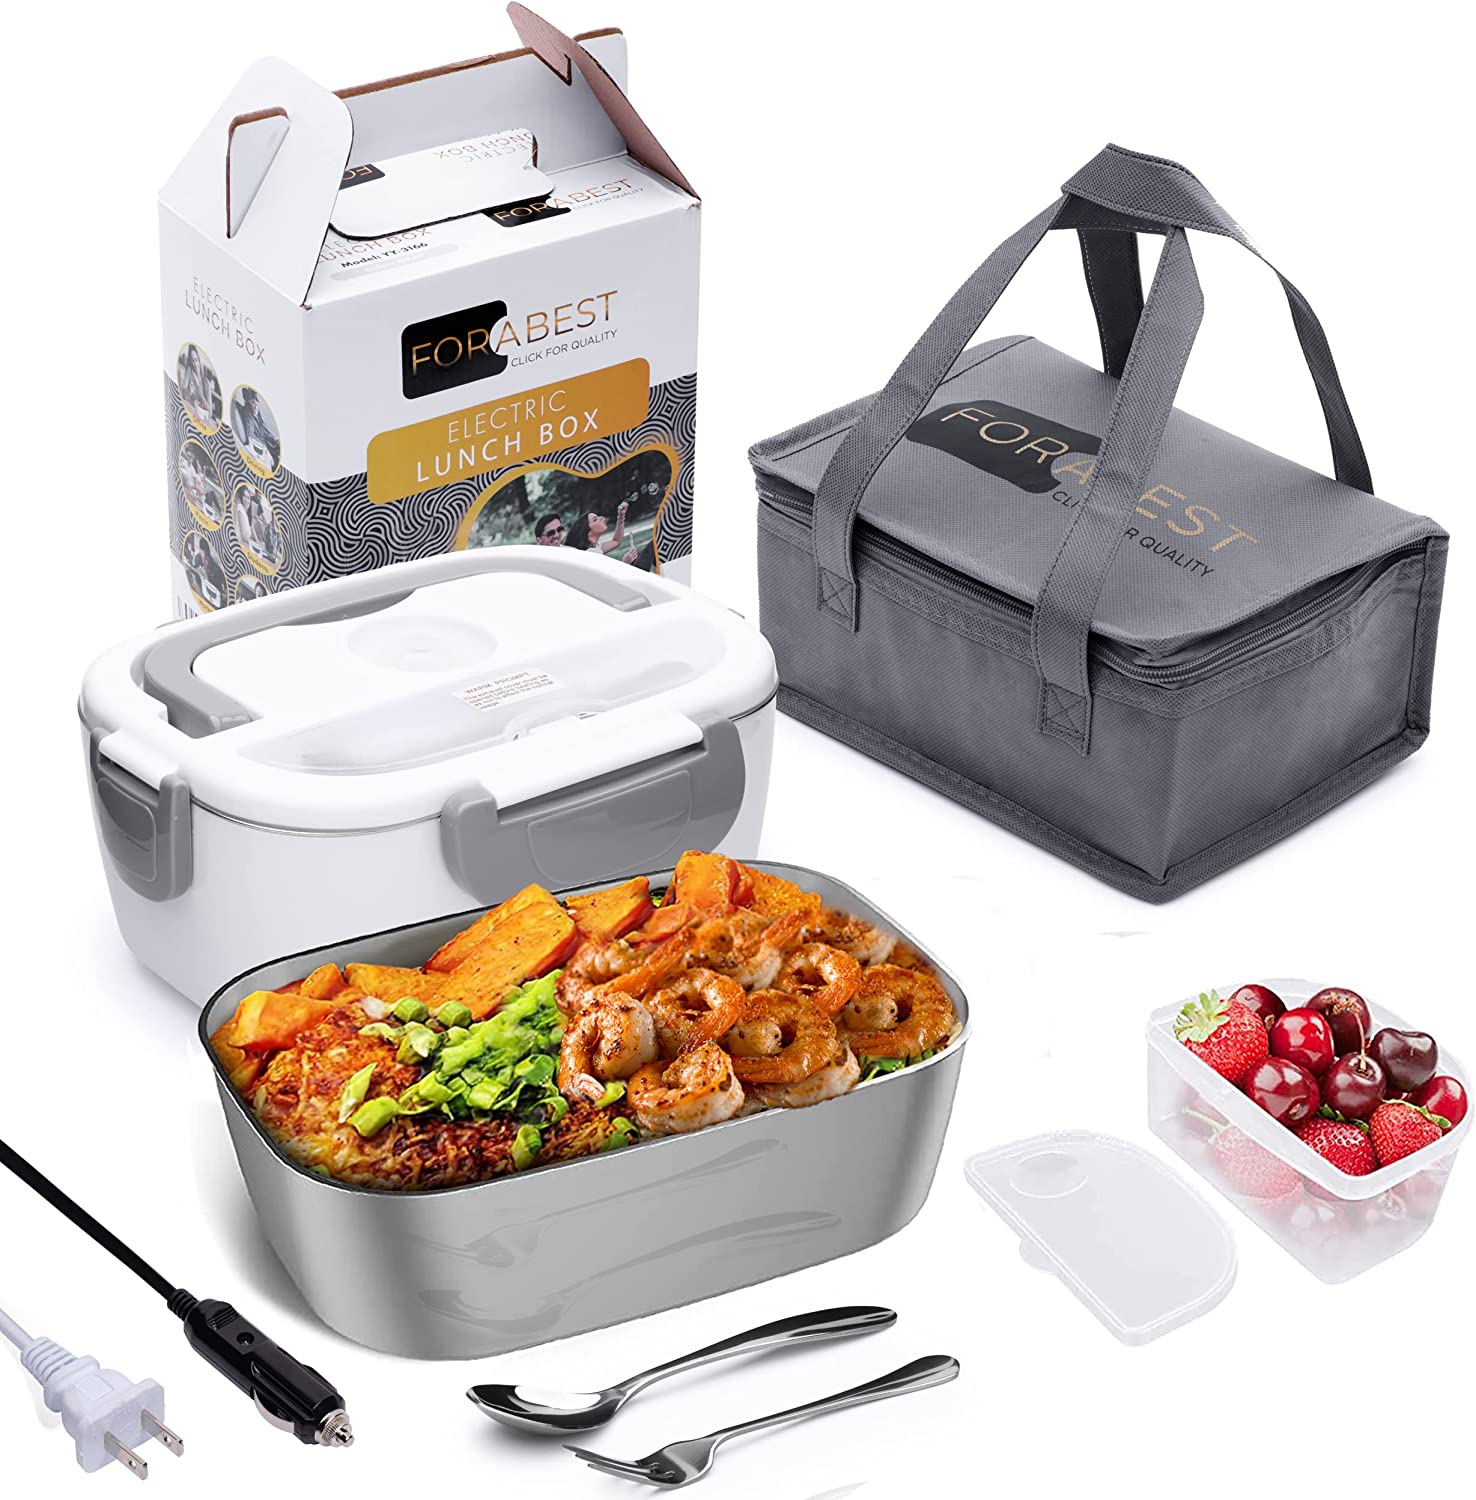 FORABEST Electric Lunch Box – Forabest